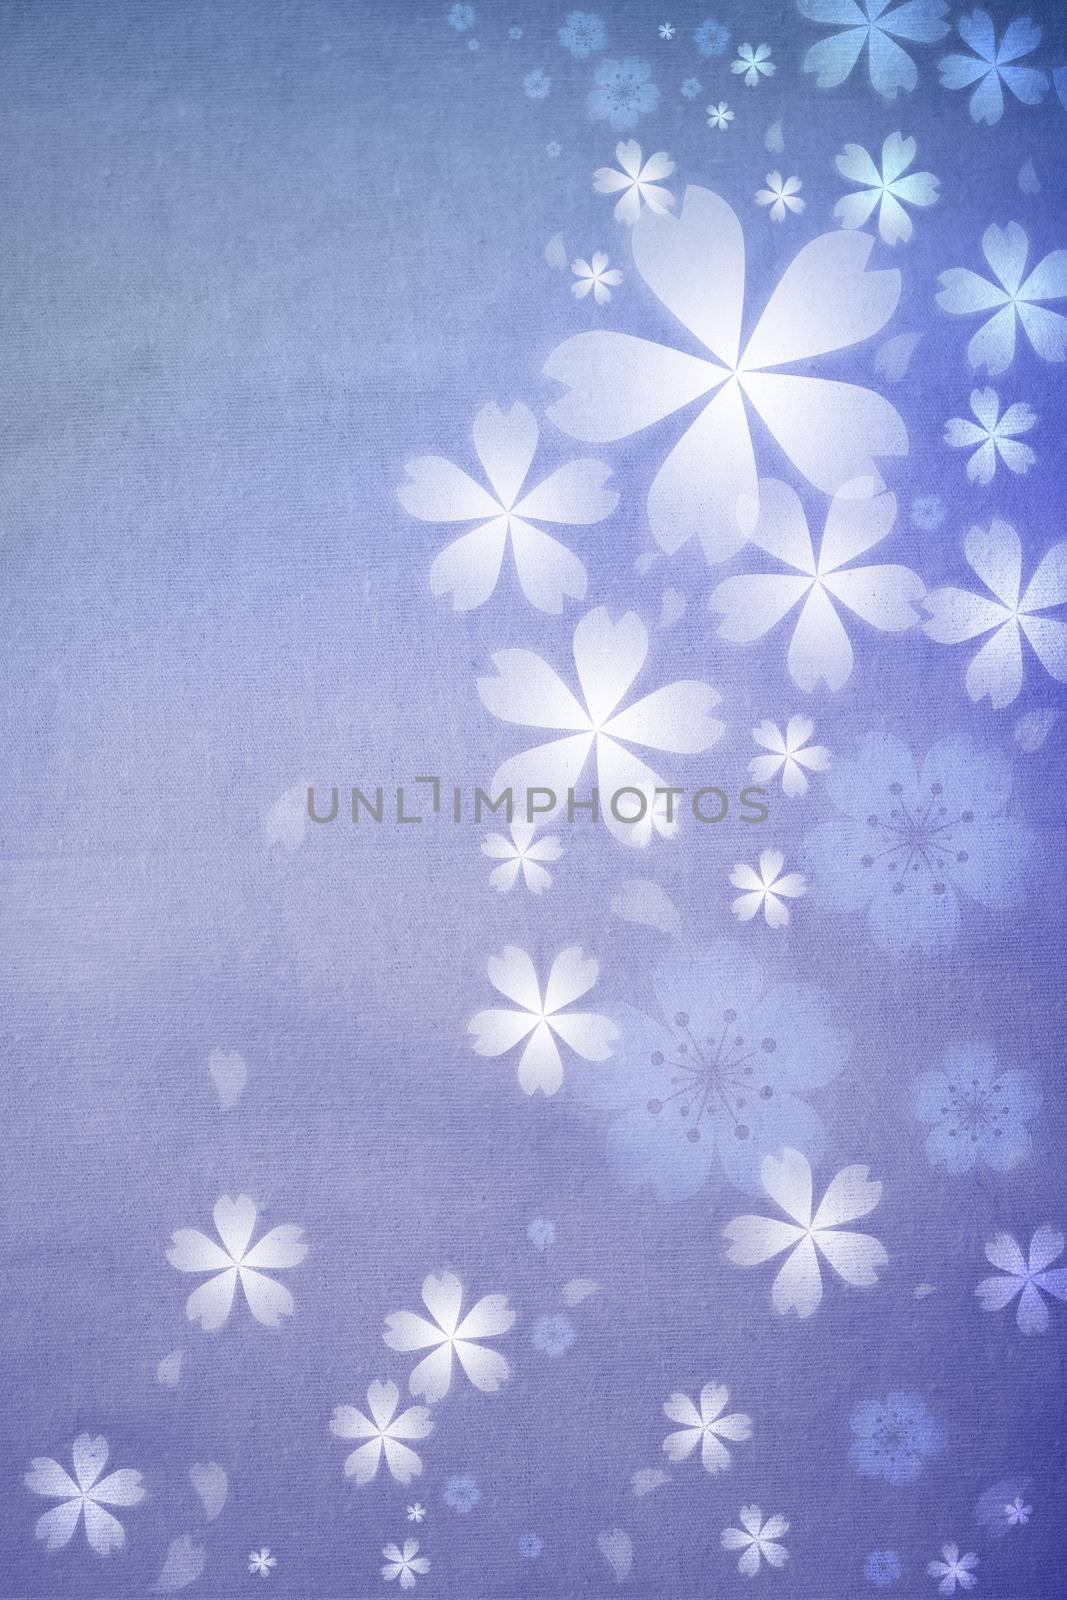 Blue colored cherry blossoms background with fabric pattern